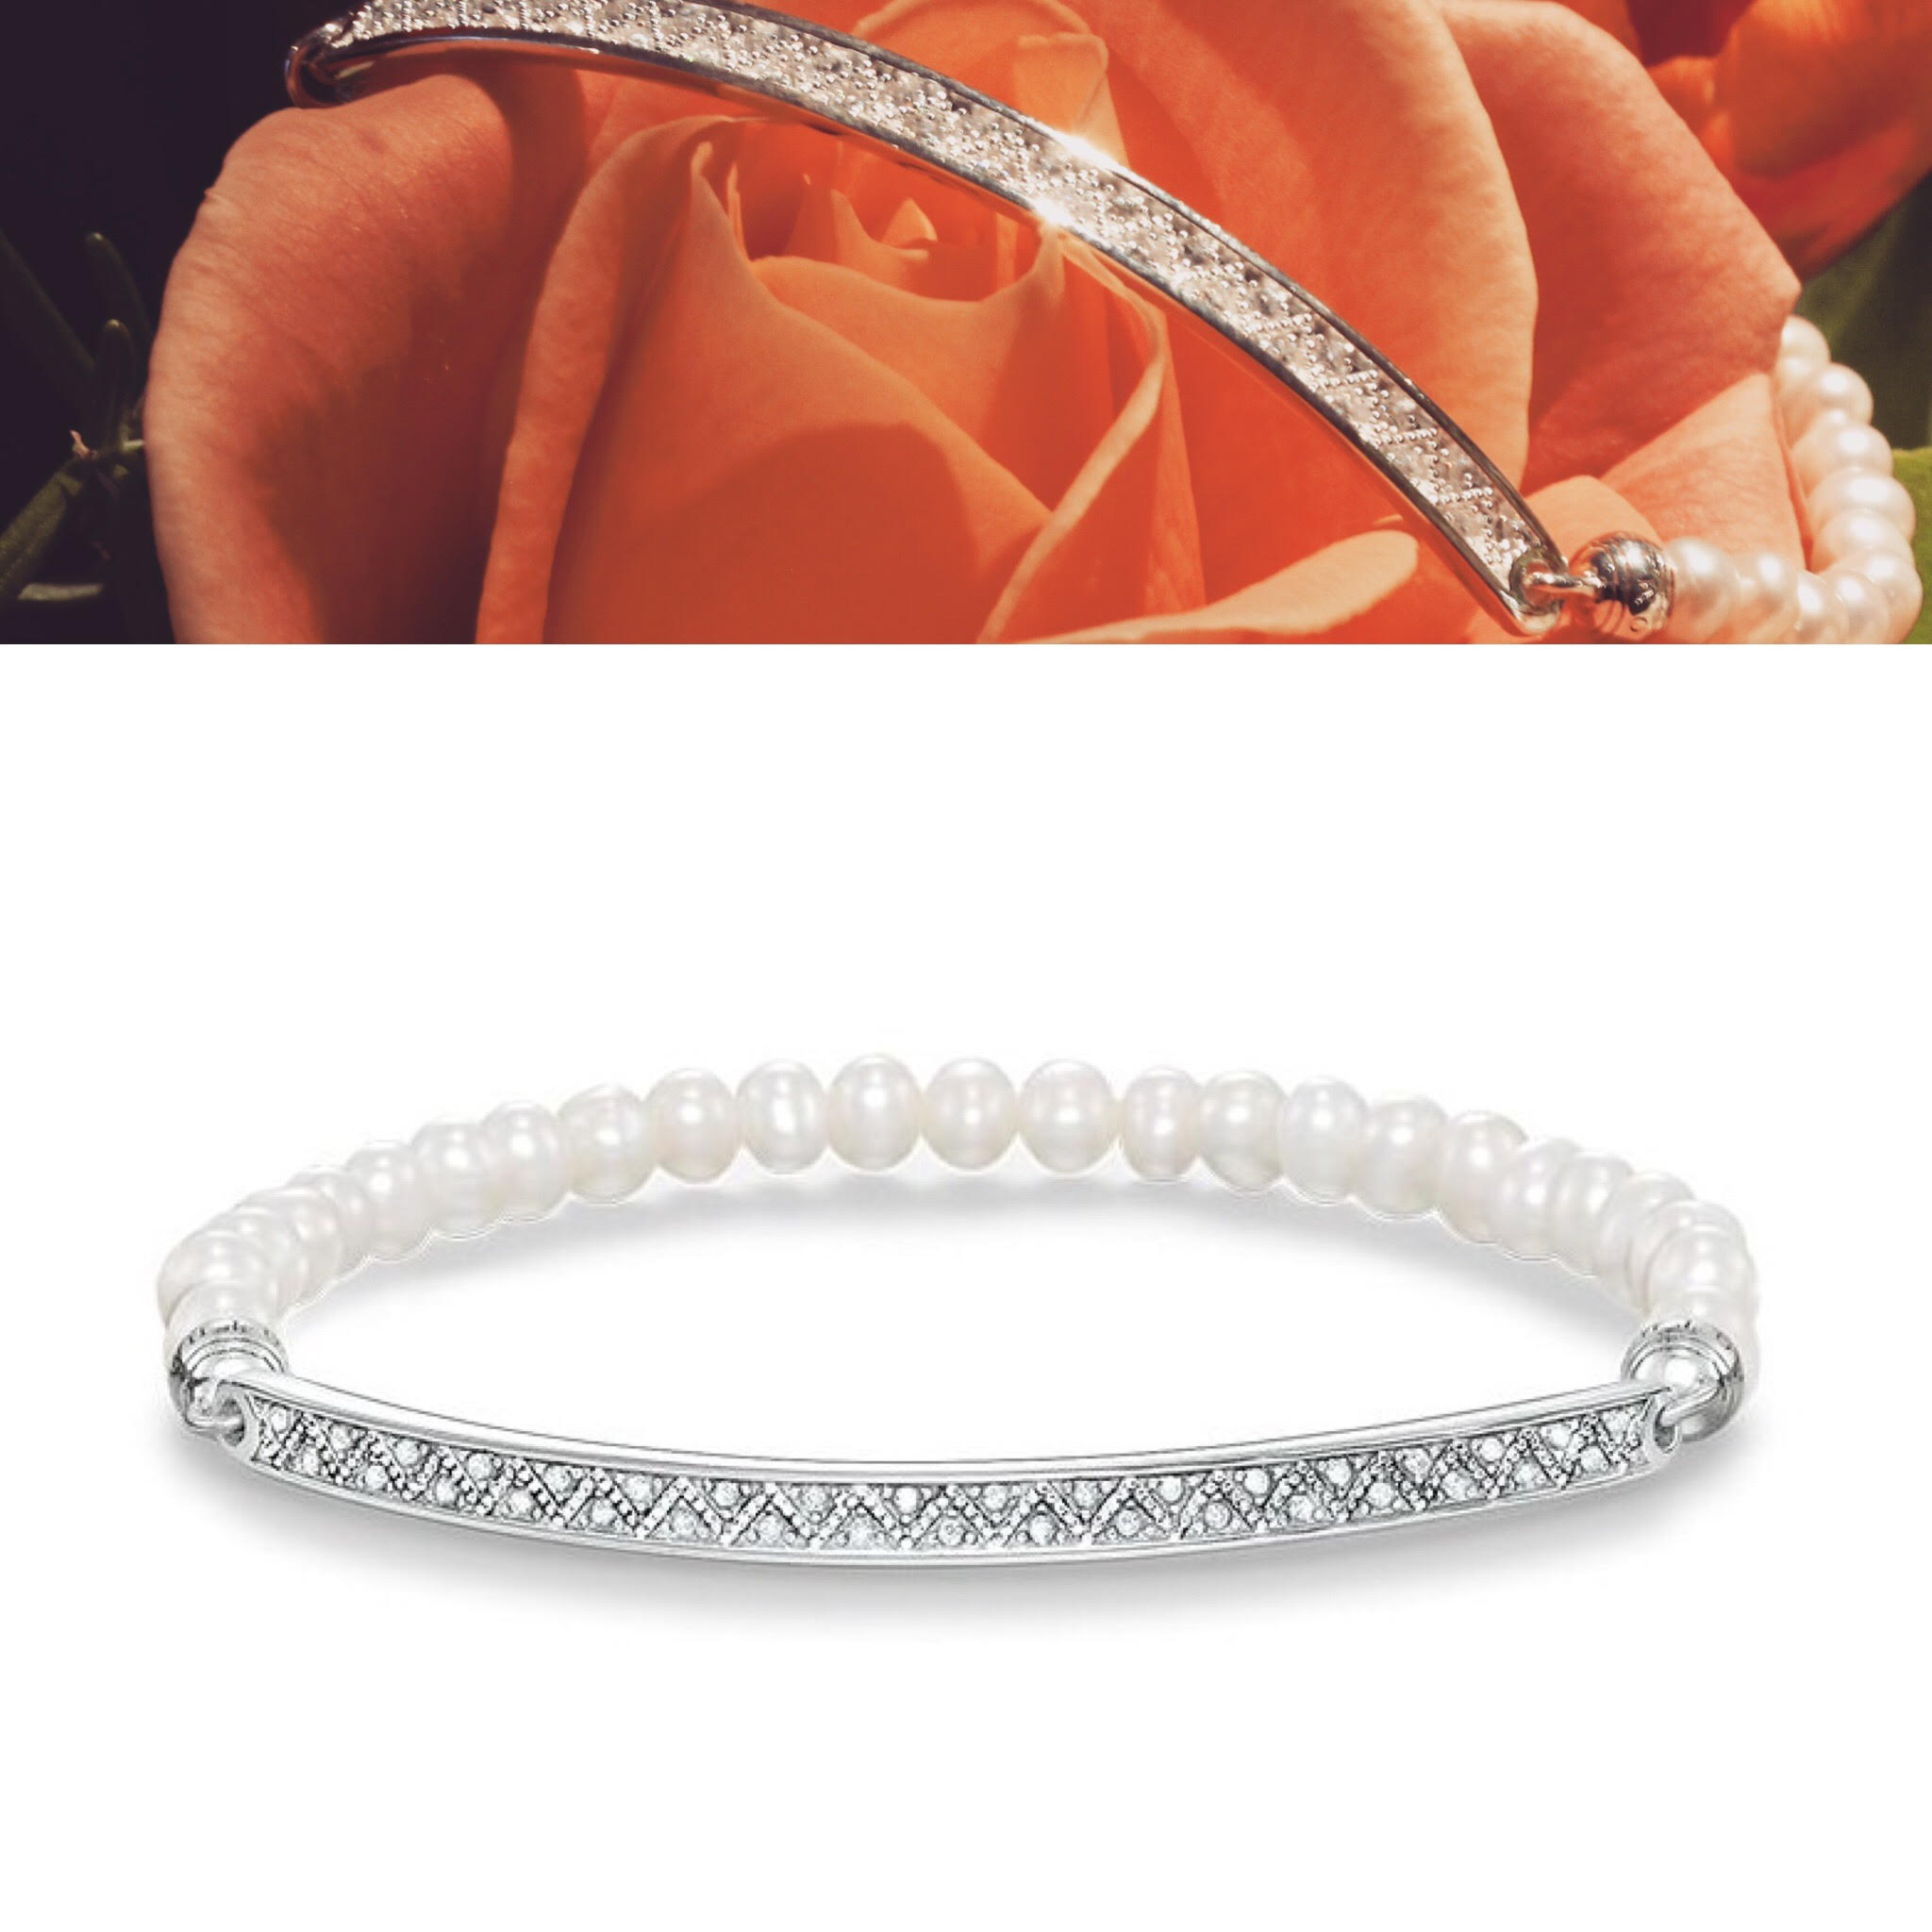 Another wonderful Valentines Gift perfectly appropriate for your love; the Thomas Sabo Love Bridge Cubic Zirconia and Pearl Bracelet. The dazzling Pave Set crystals will dazzle her eyes as well as her heart. £125